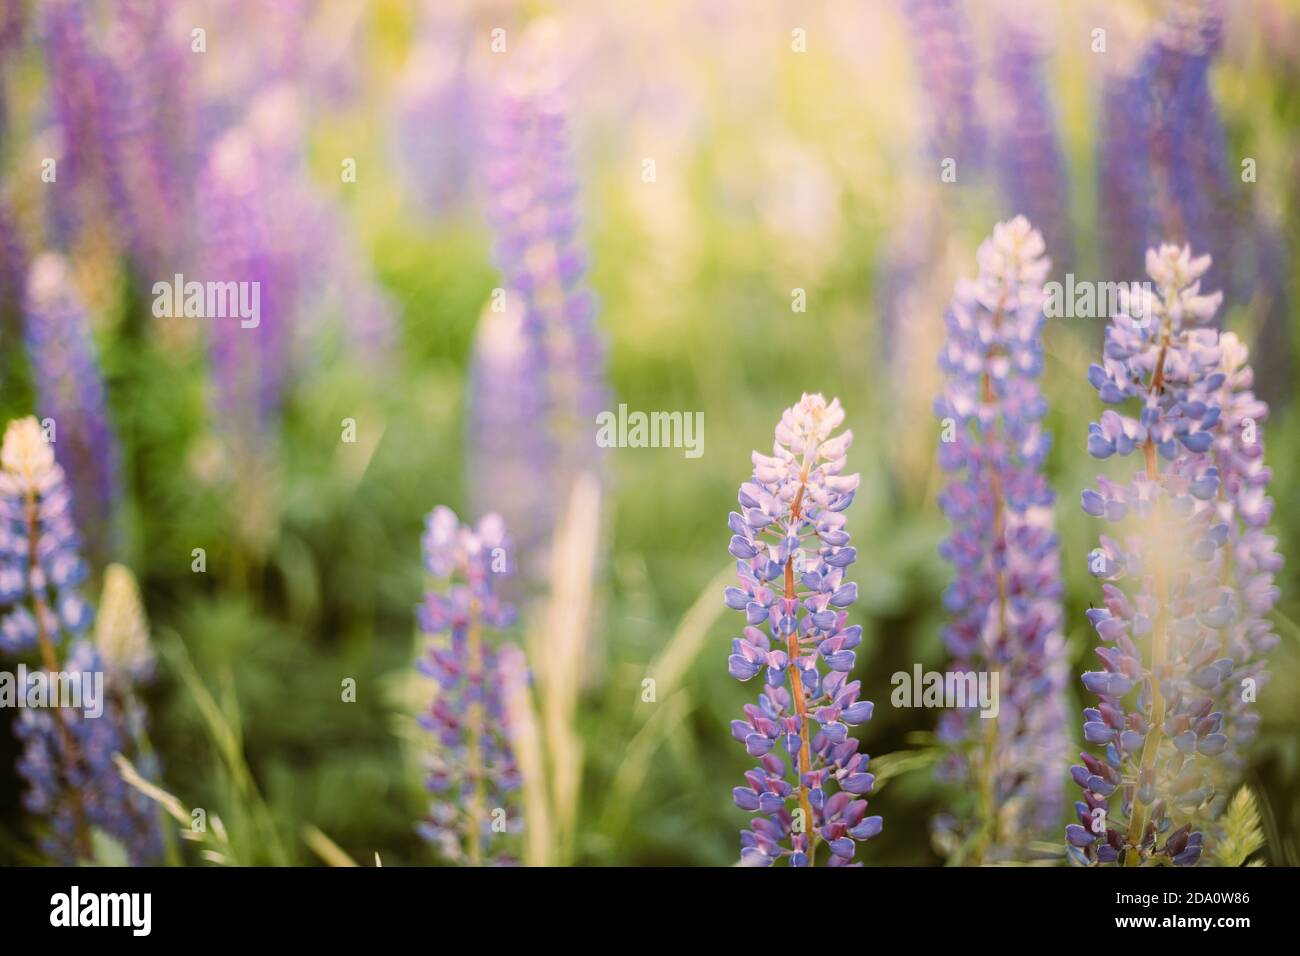 Wild Flowers Lupine In Summer Meadow. Lupinus, Commonly Known As Lupin Or Lupine, Is A Genus Of Flowering Plants In The Legume Family, Fabaceae Stock Photo